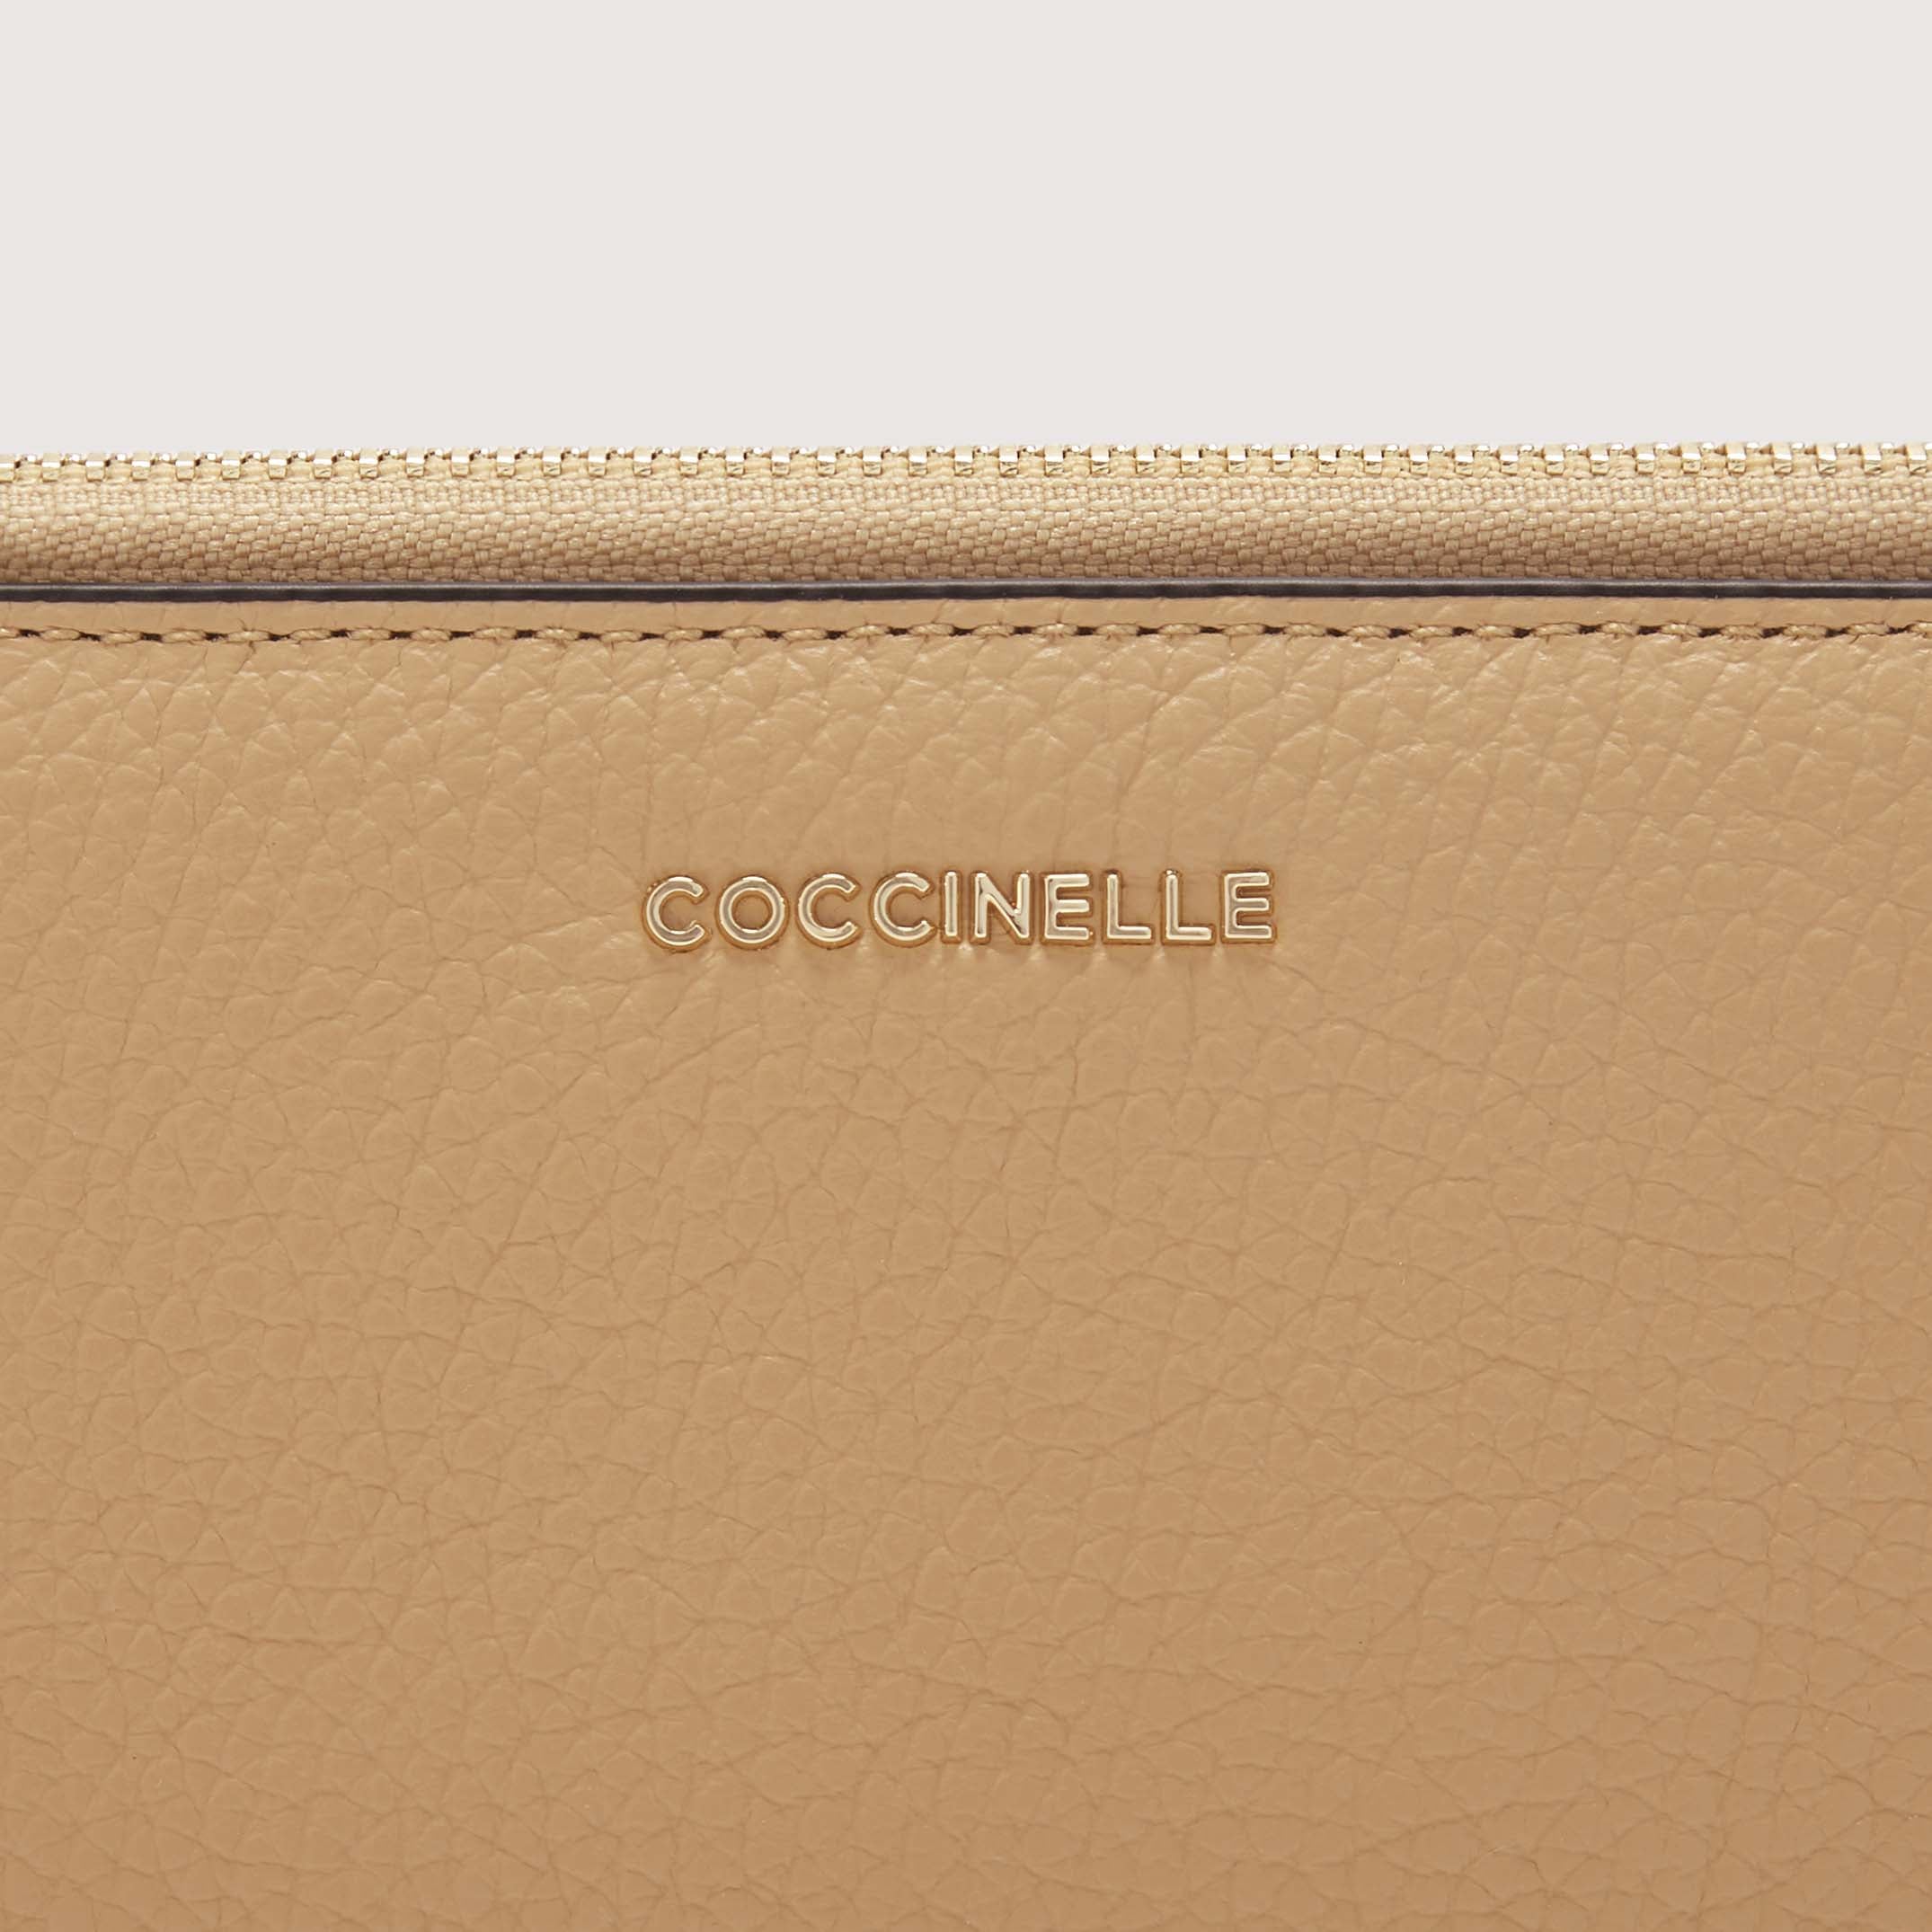 Coccinelle Metallic Tricolor Grained Leather Large Wallet